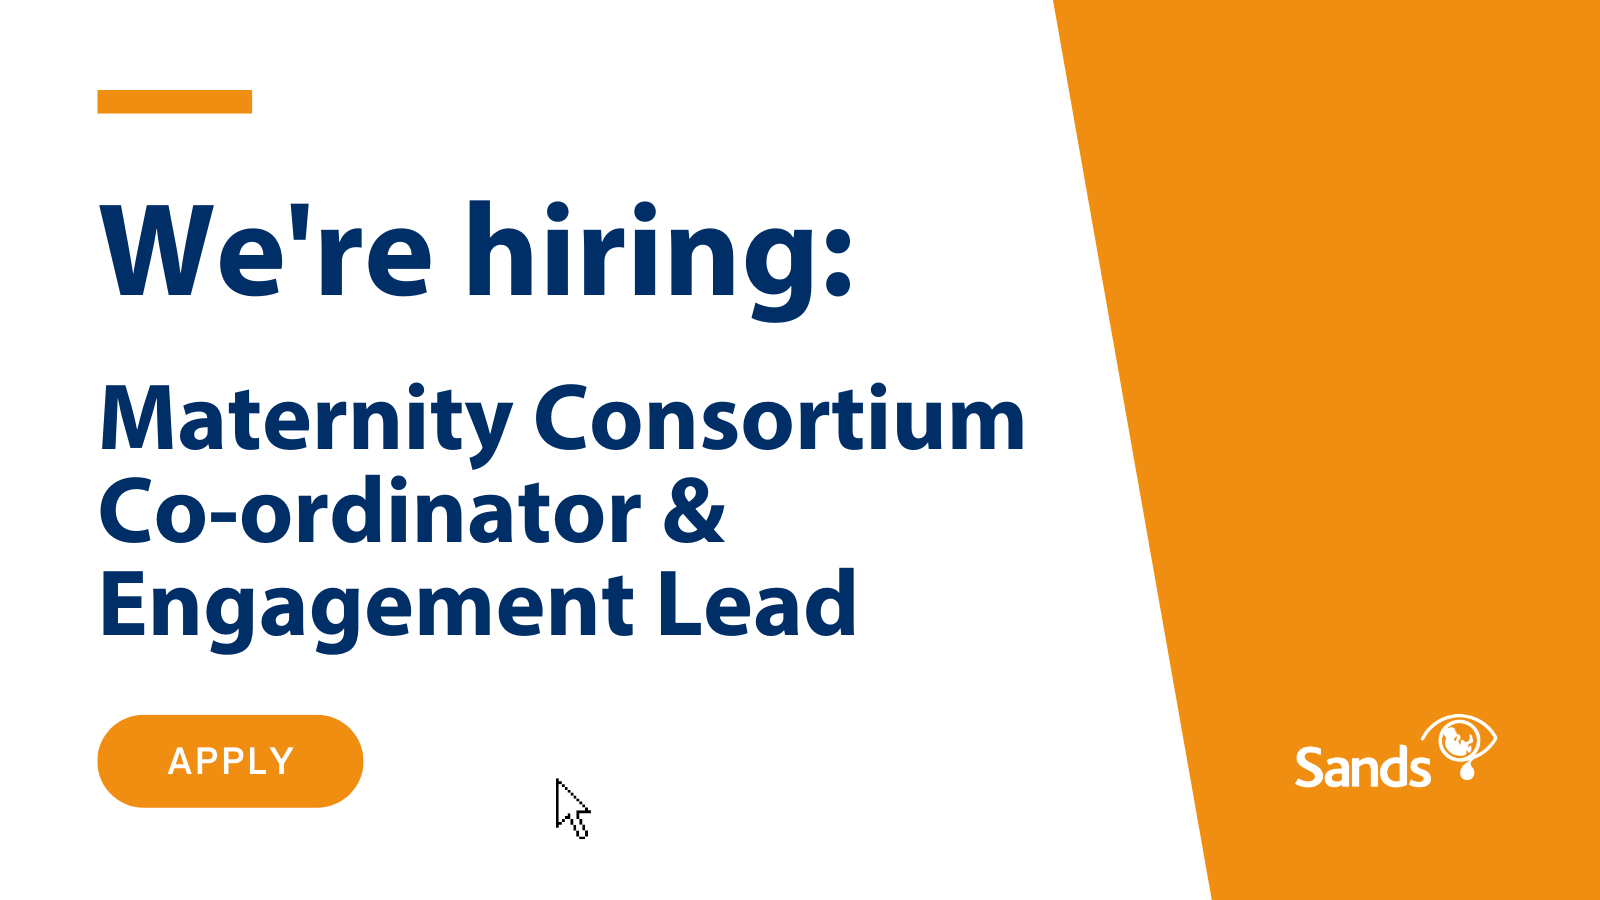 We are hiring Maternity Consortium Co-ordinator and Engagement Lead (6-month Fixed-Term Contract or Secondment)